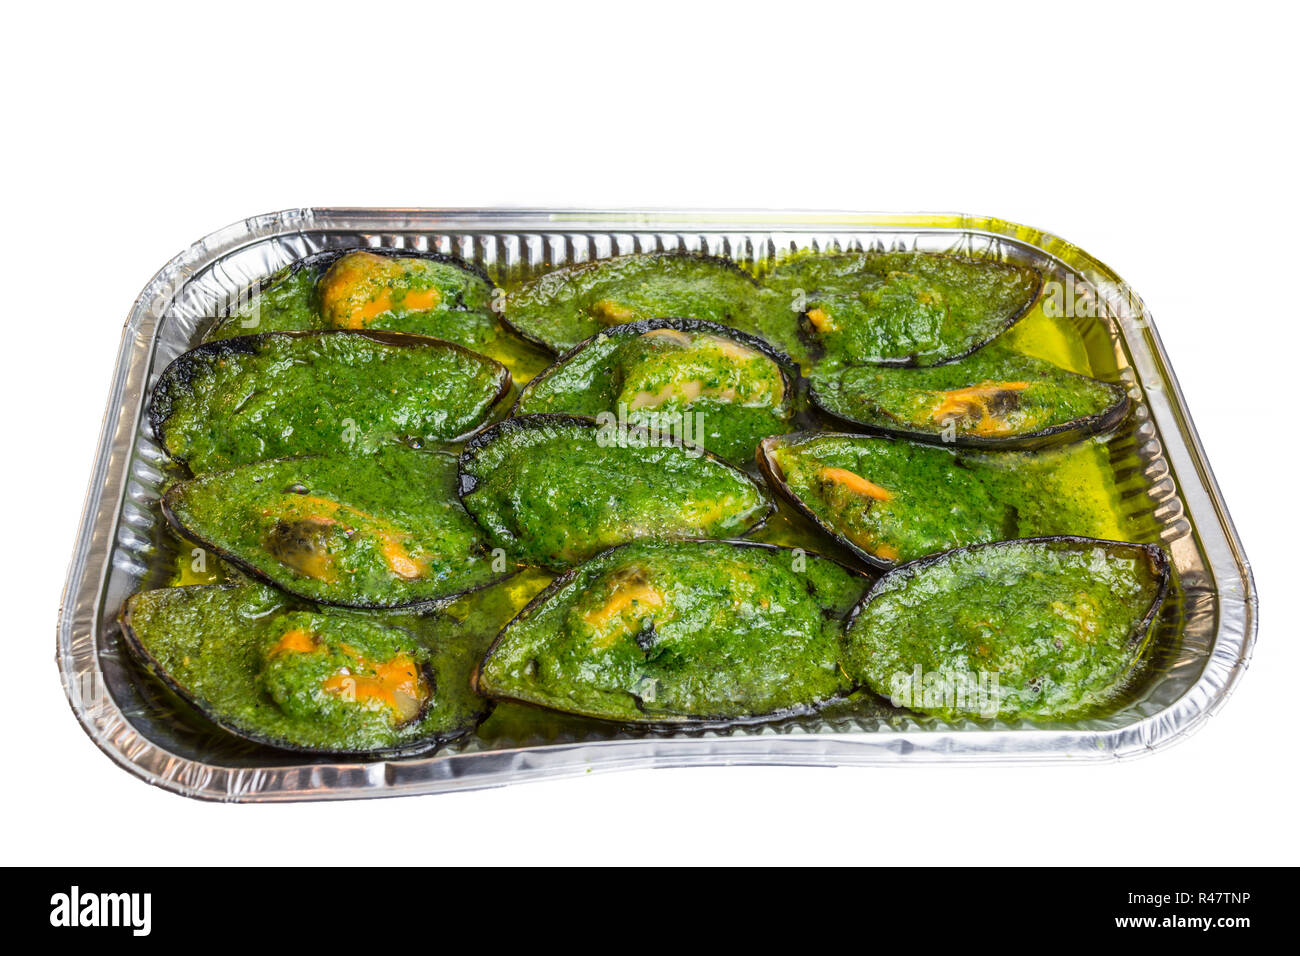 mussels with garlic sauce Stock Photo